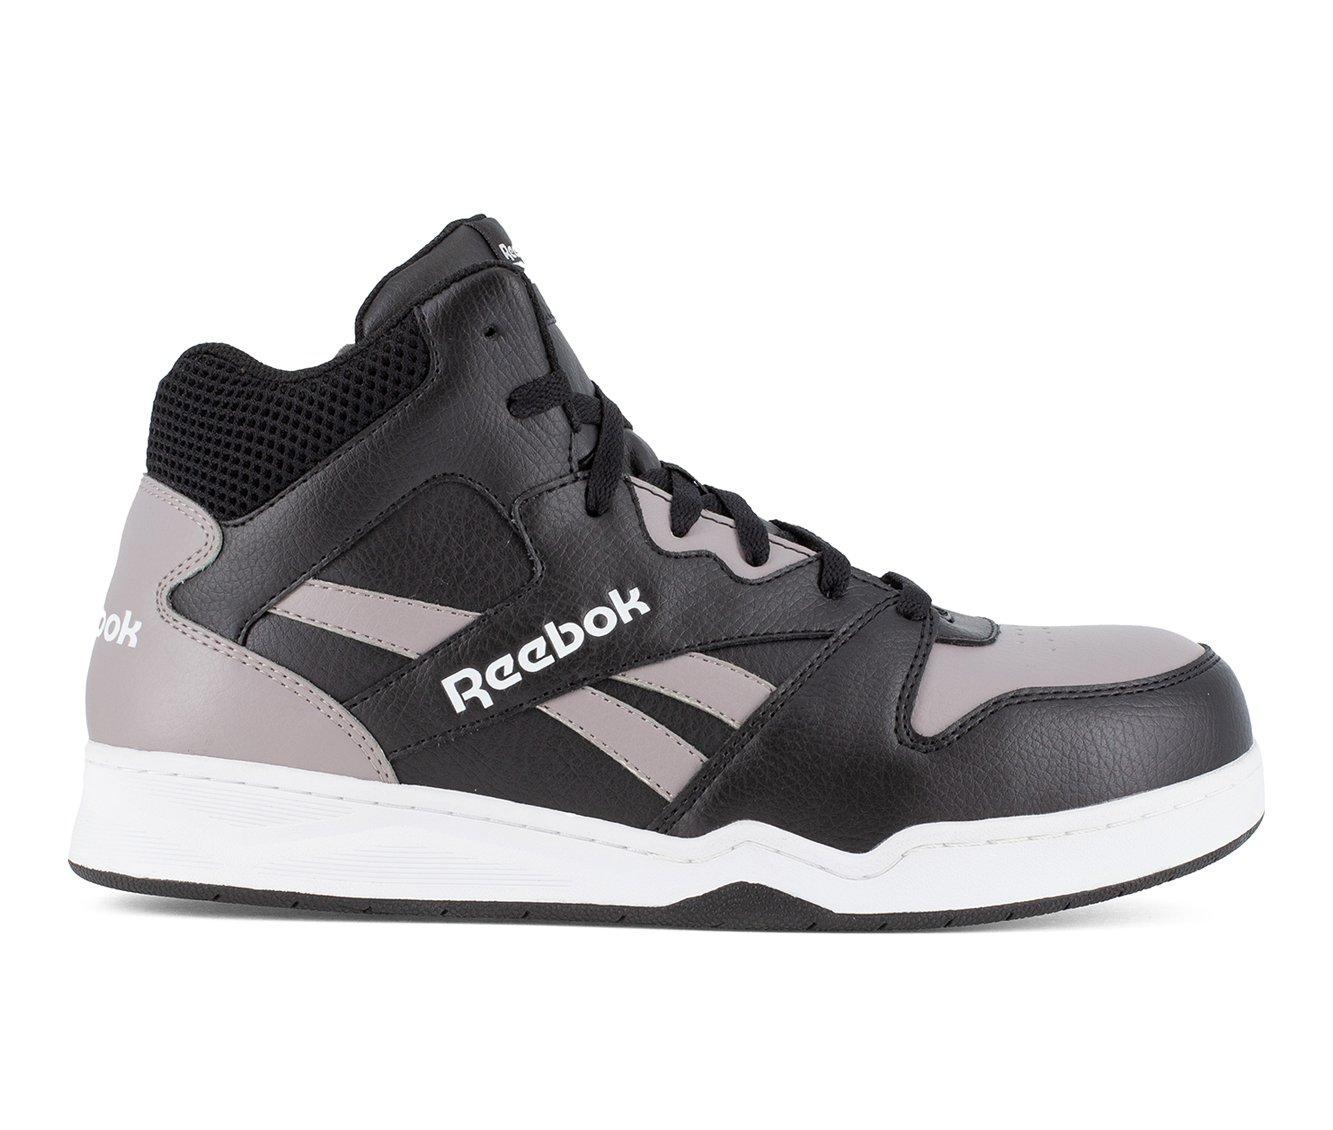 Reebok Steel Toe Work Boots Shoes Boot World, 44% OFF